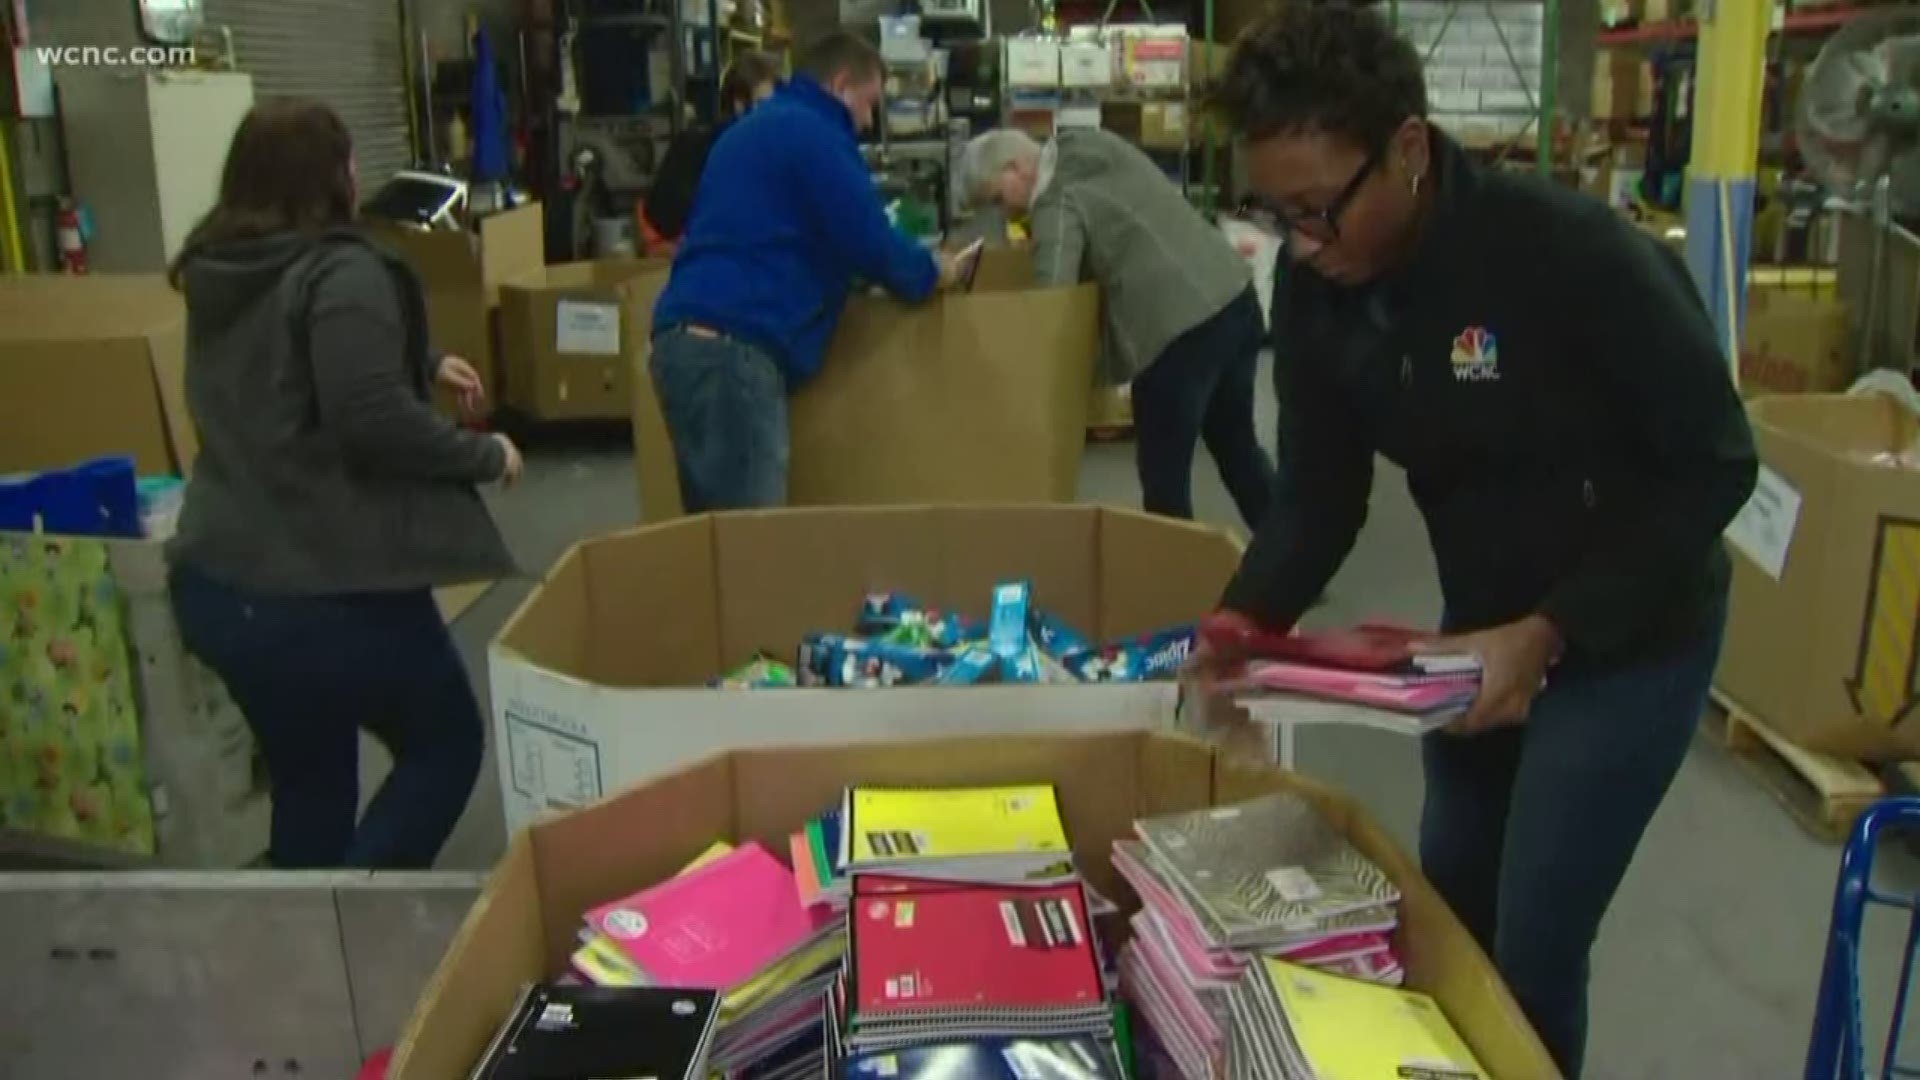 For the past several months, NBC Charlotte has partnered with Classroom Central to get Charlotte-area teachers much-needed supplies so they don't have to buy them with their own money.